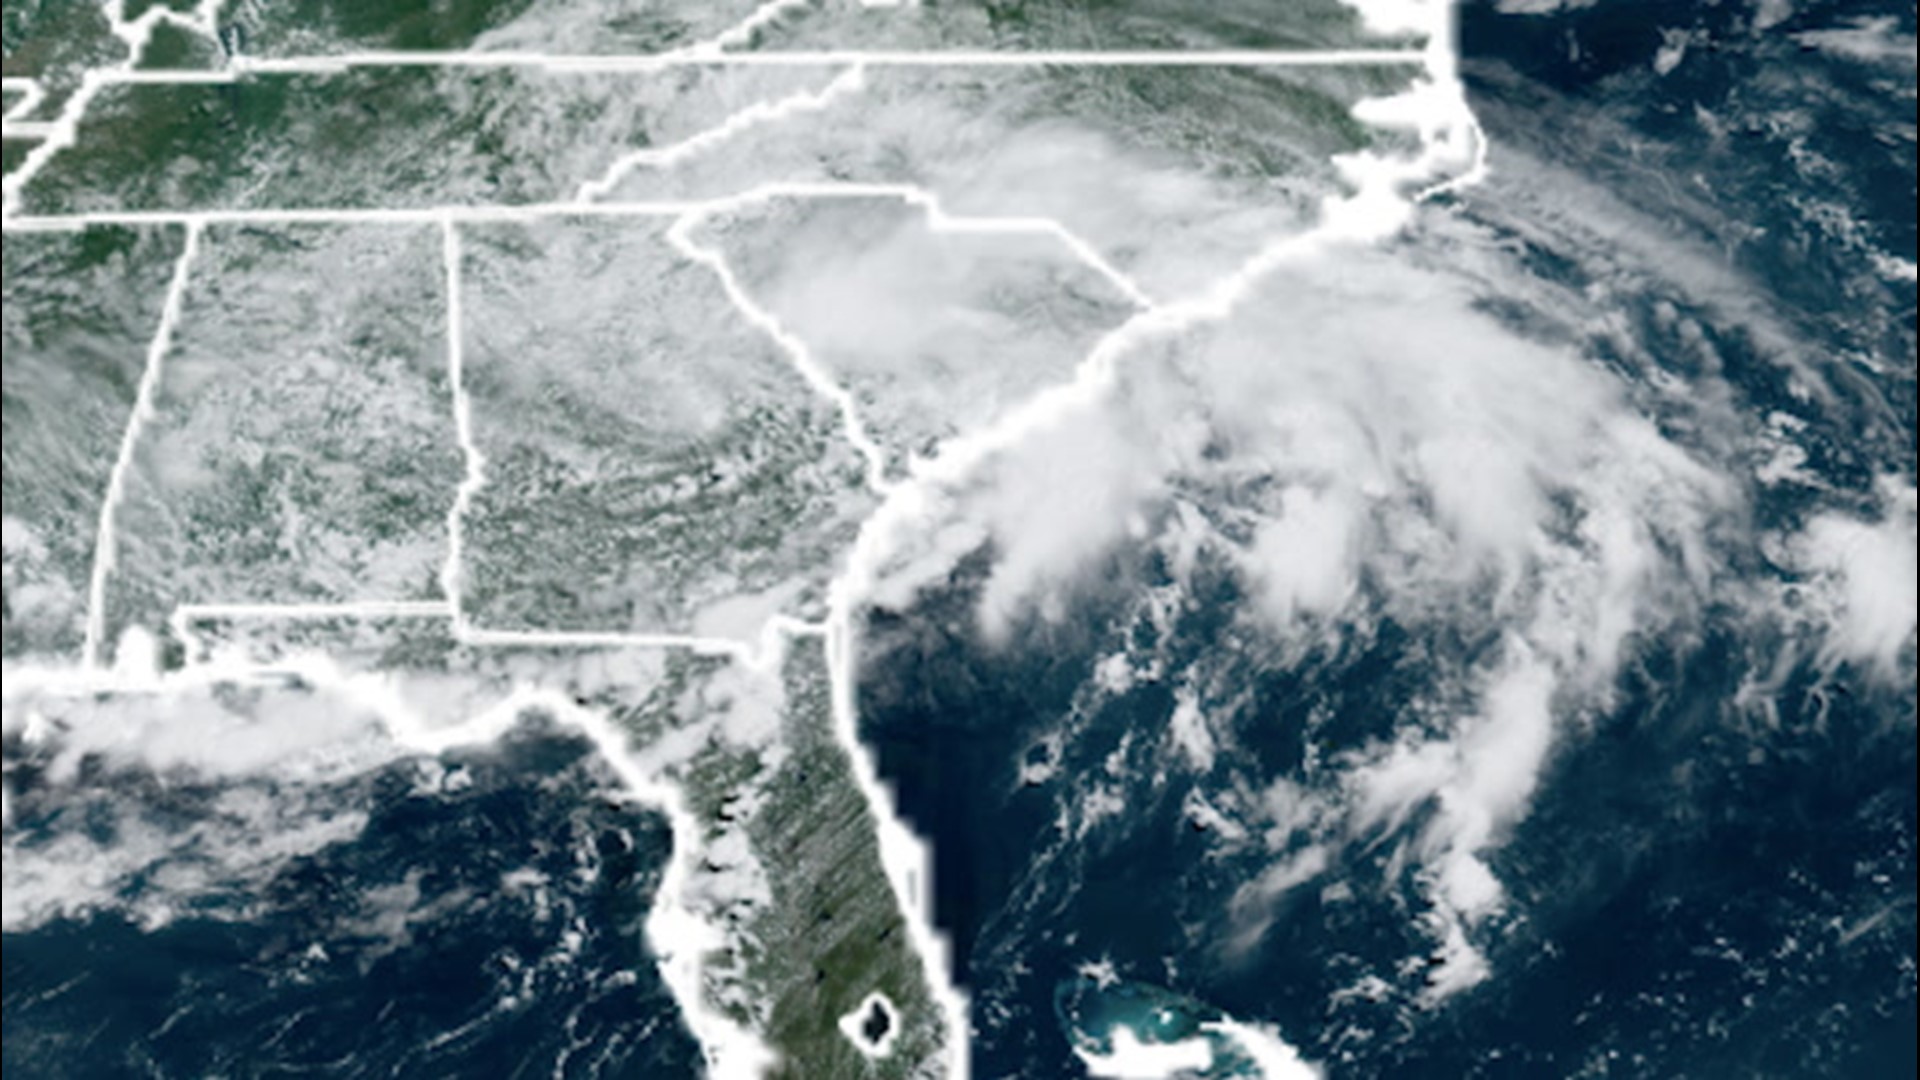 The early hurricane season has broken records in the month of June, and it could break more with another area of concern forming along the U.S. Southeast coast.